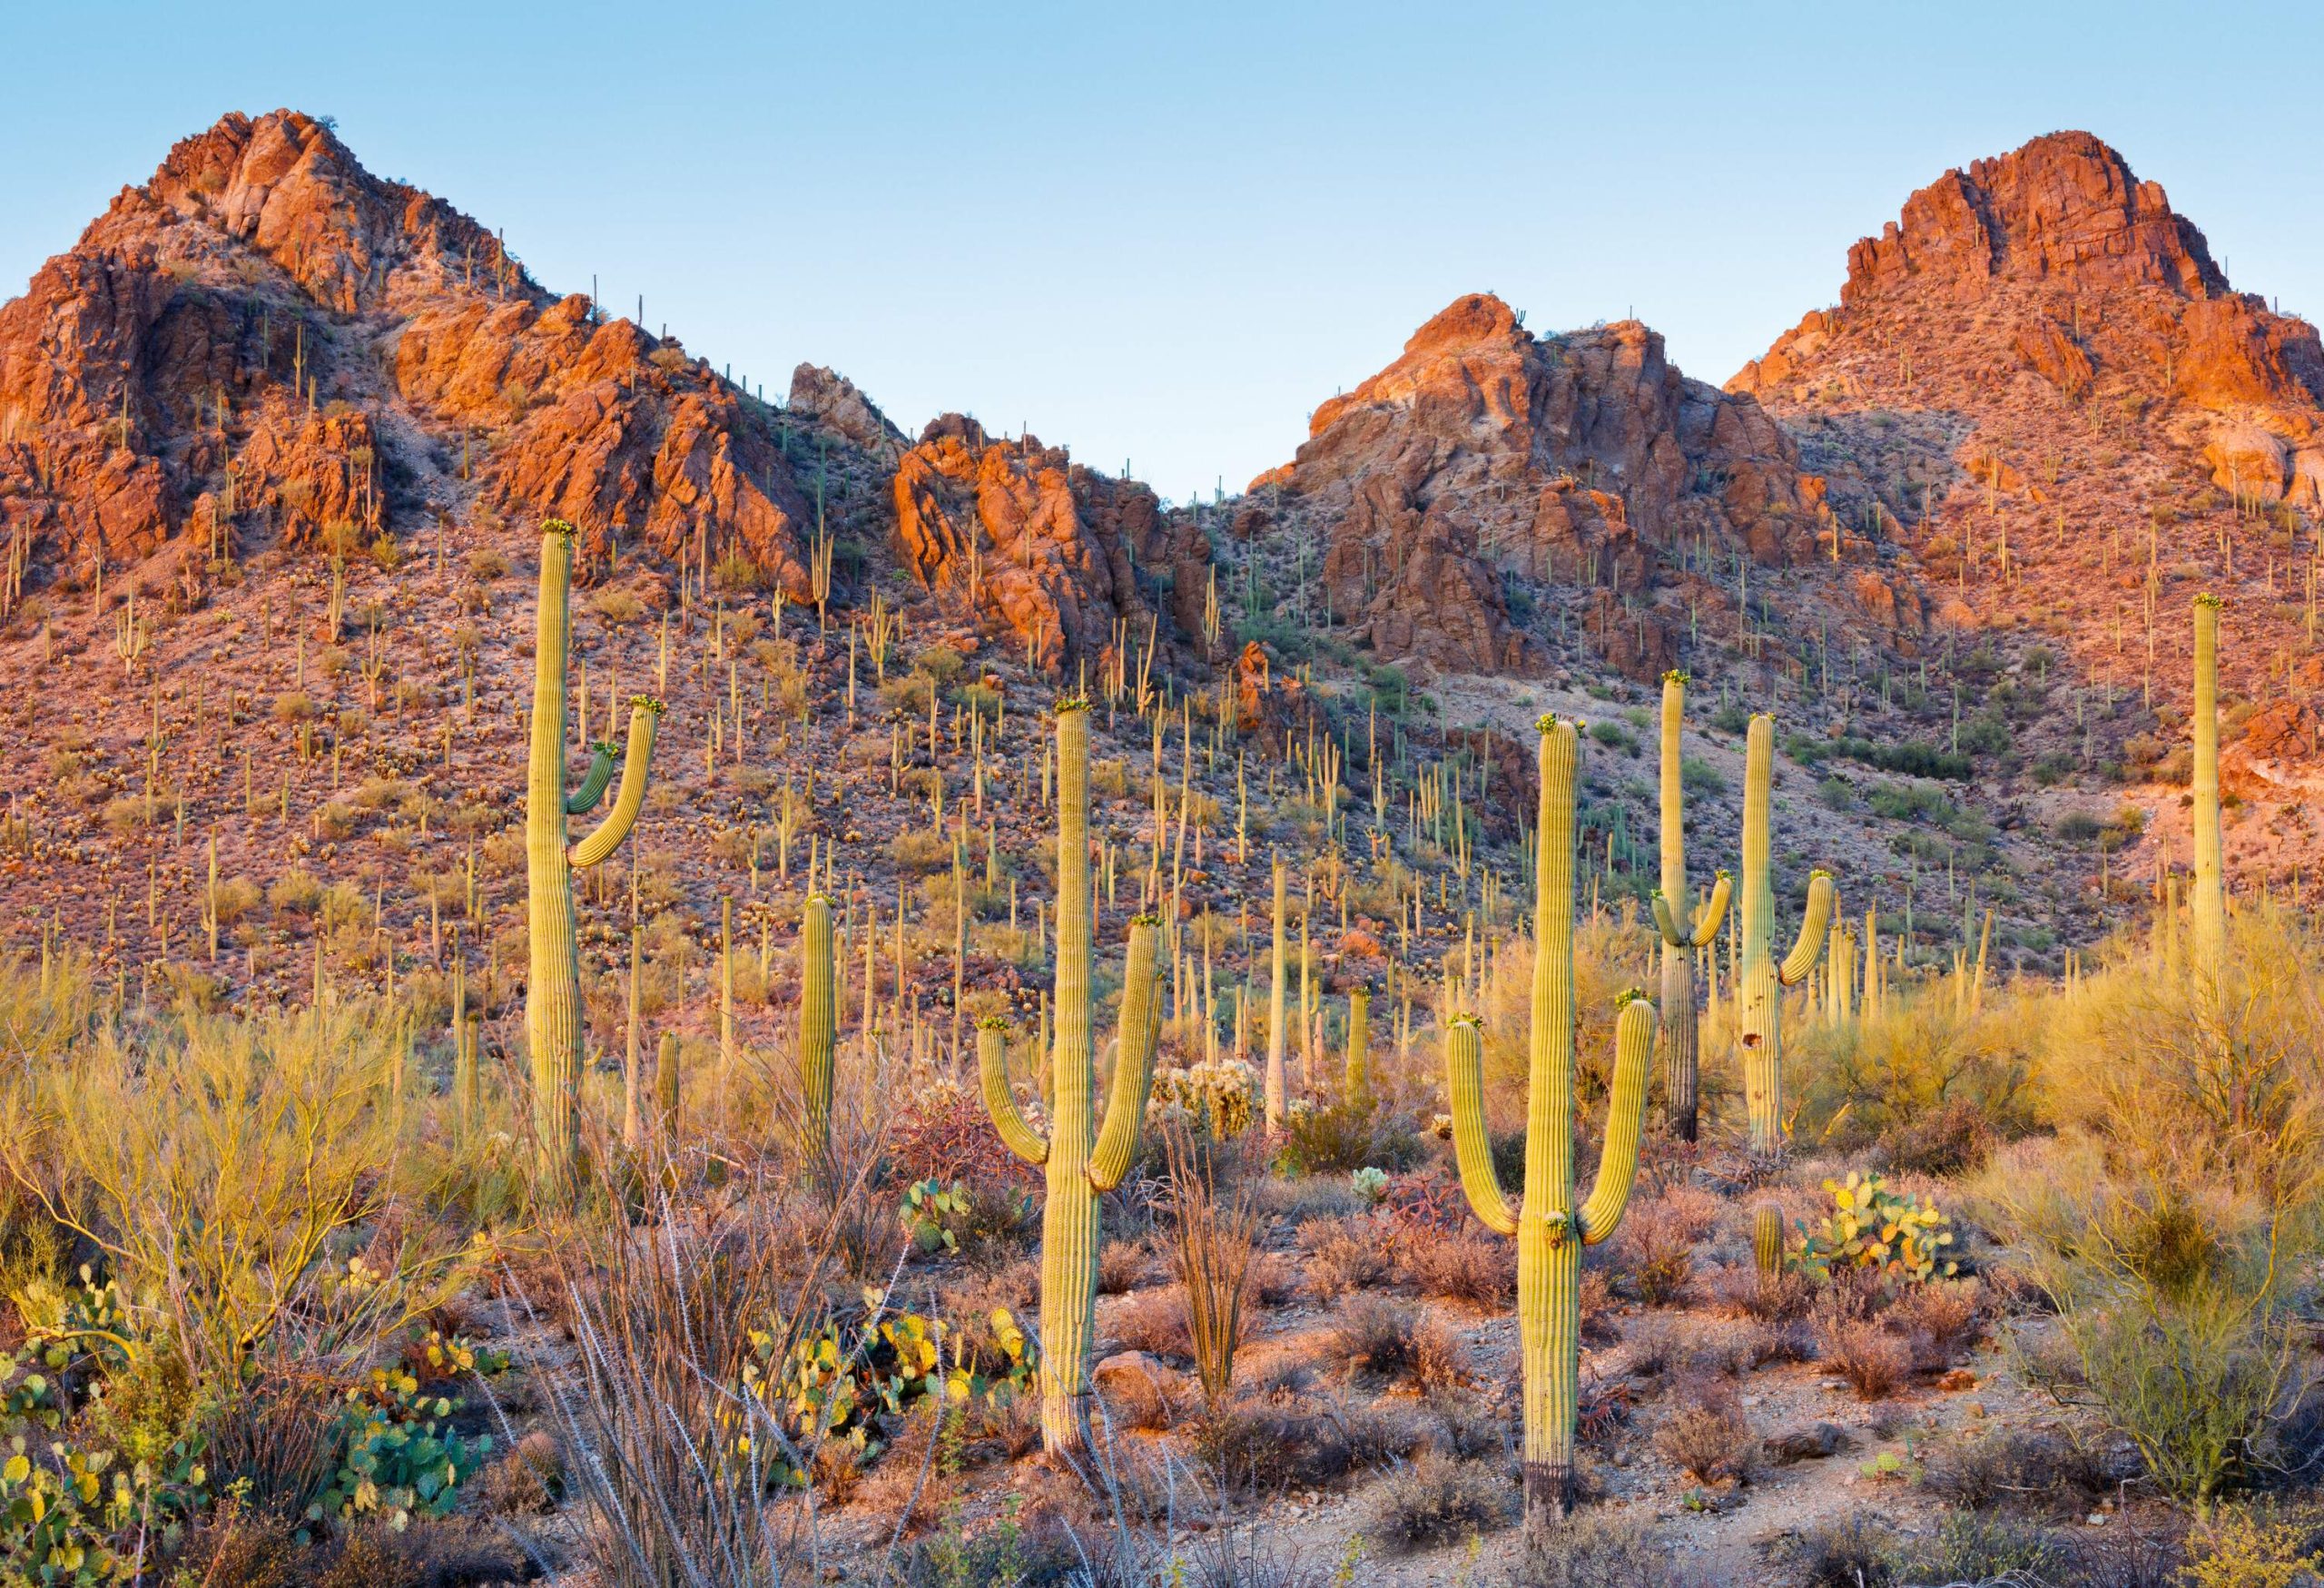 A rugged terrain covered with cactus plants at the base of jagged mountains.